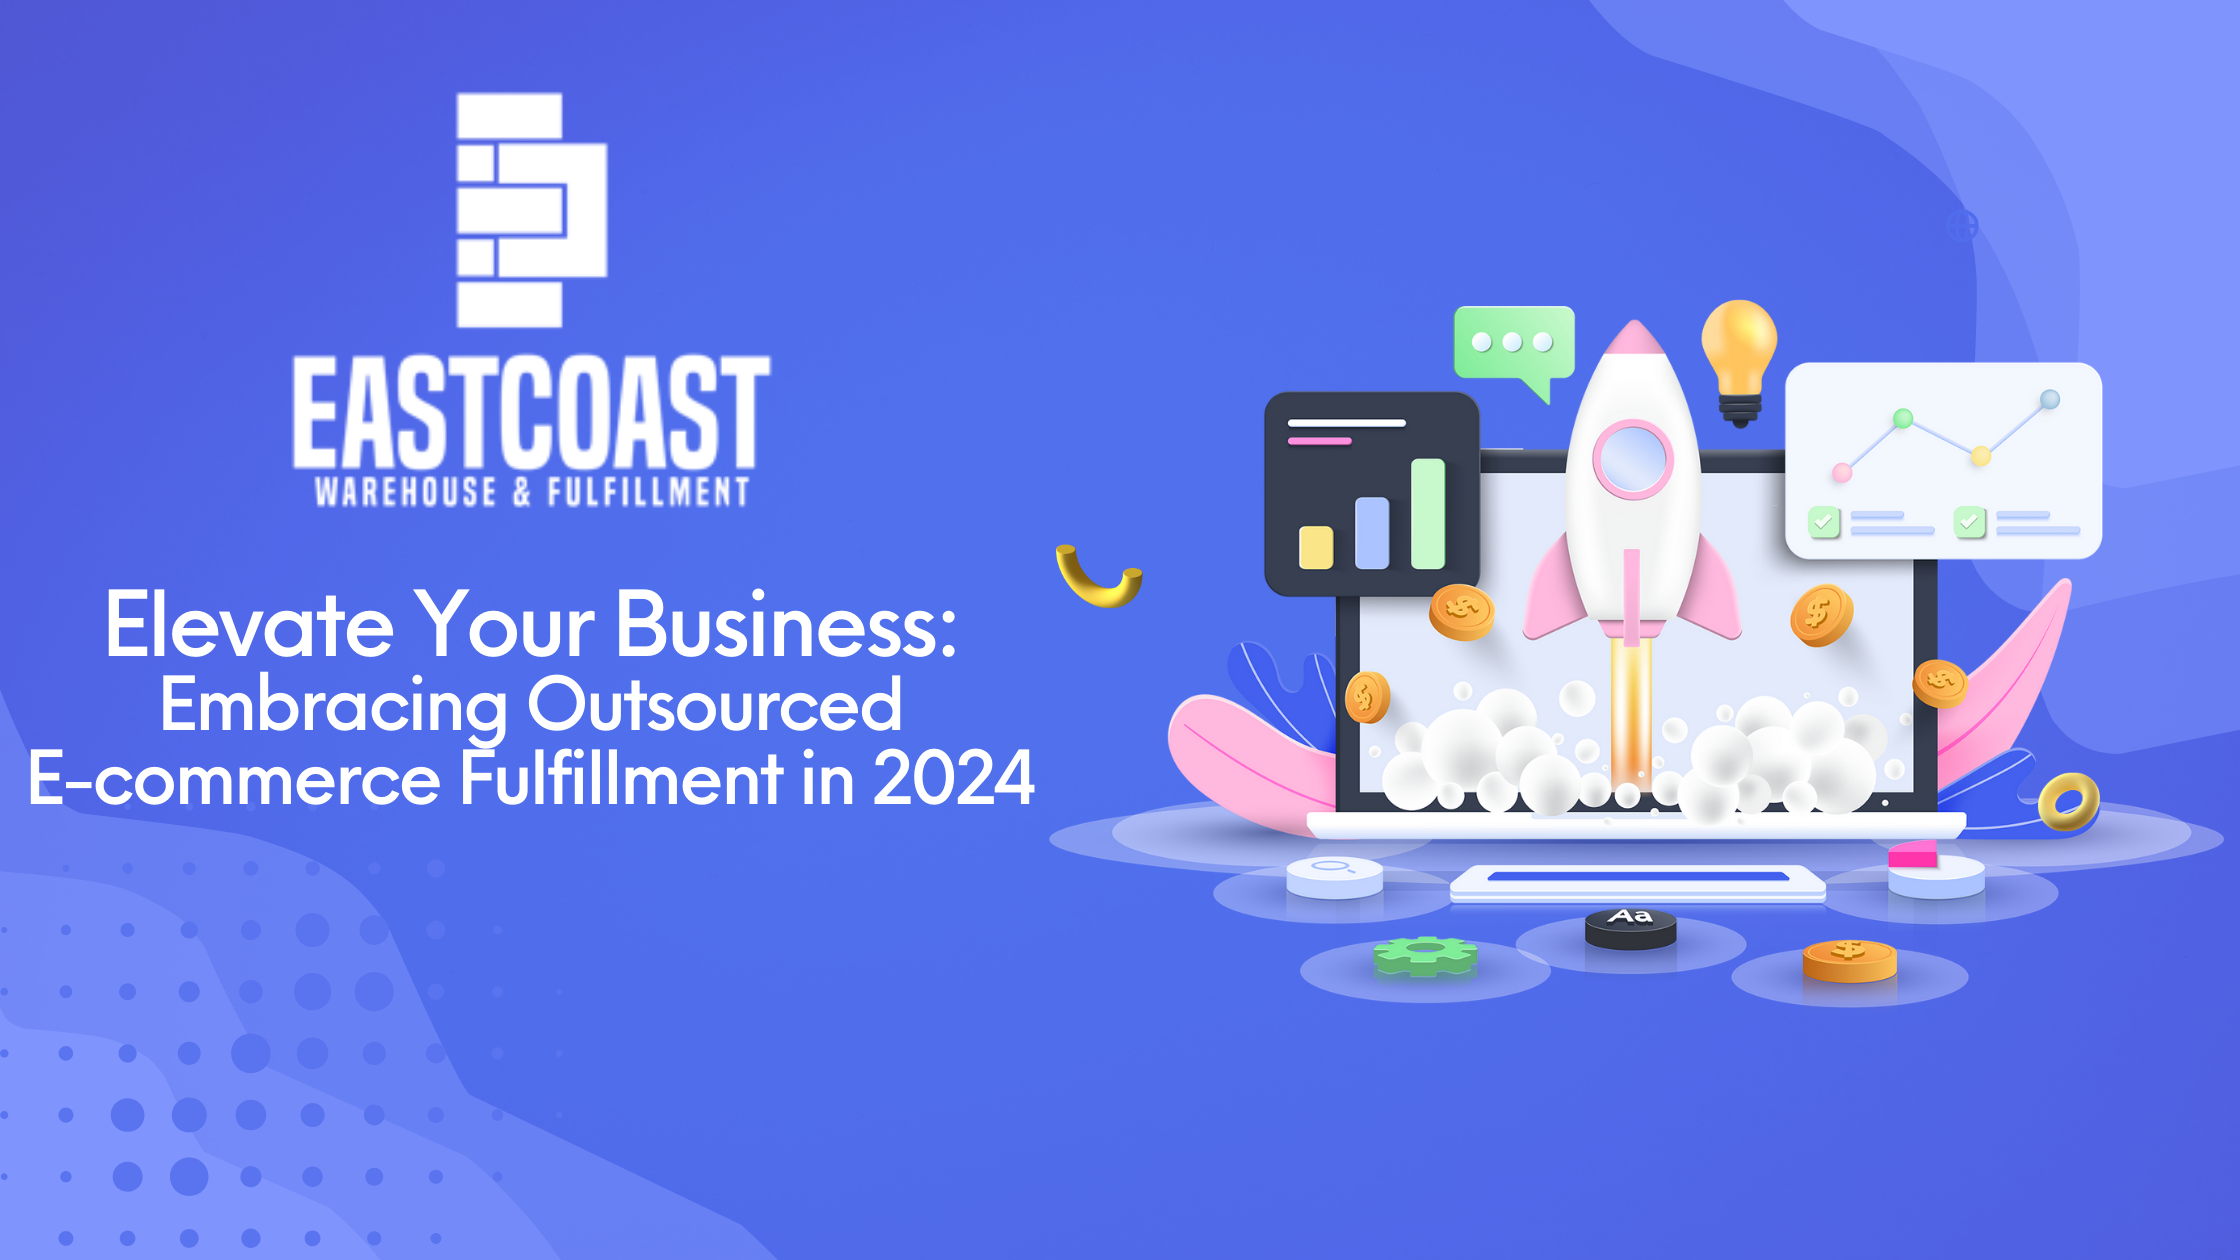 Embracing Outsourced E-commerce Fulfillment in 2024